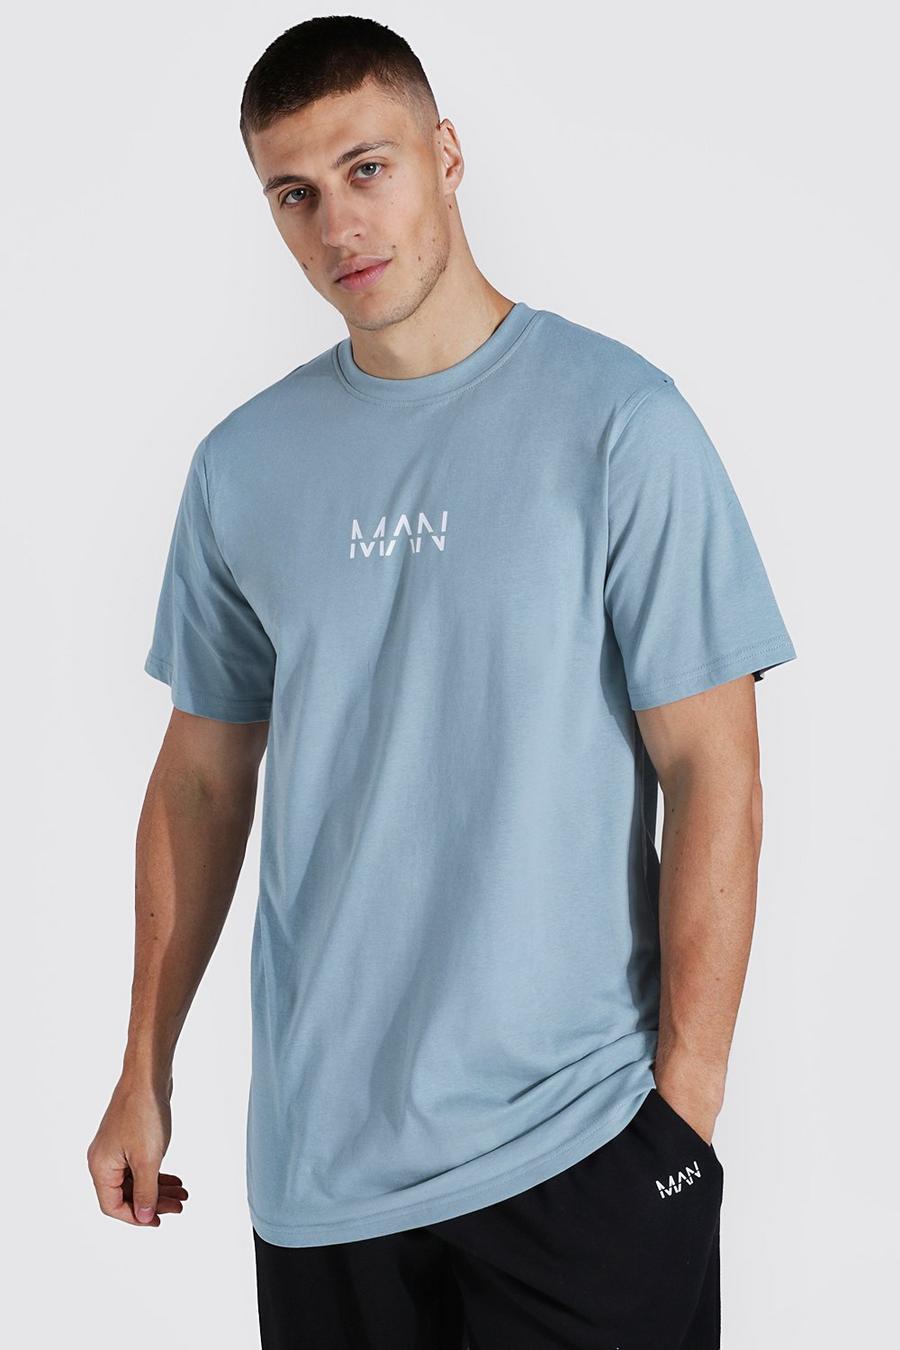 T-shirt long - MAN, Dusty blue image number 1